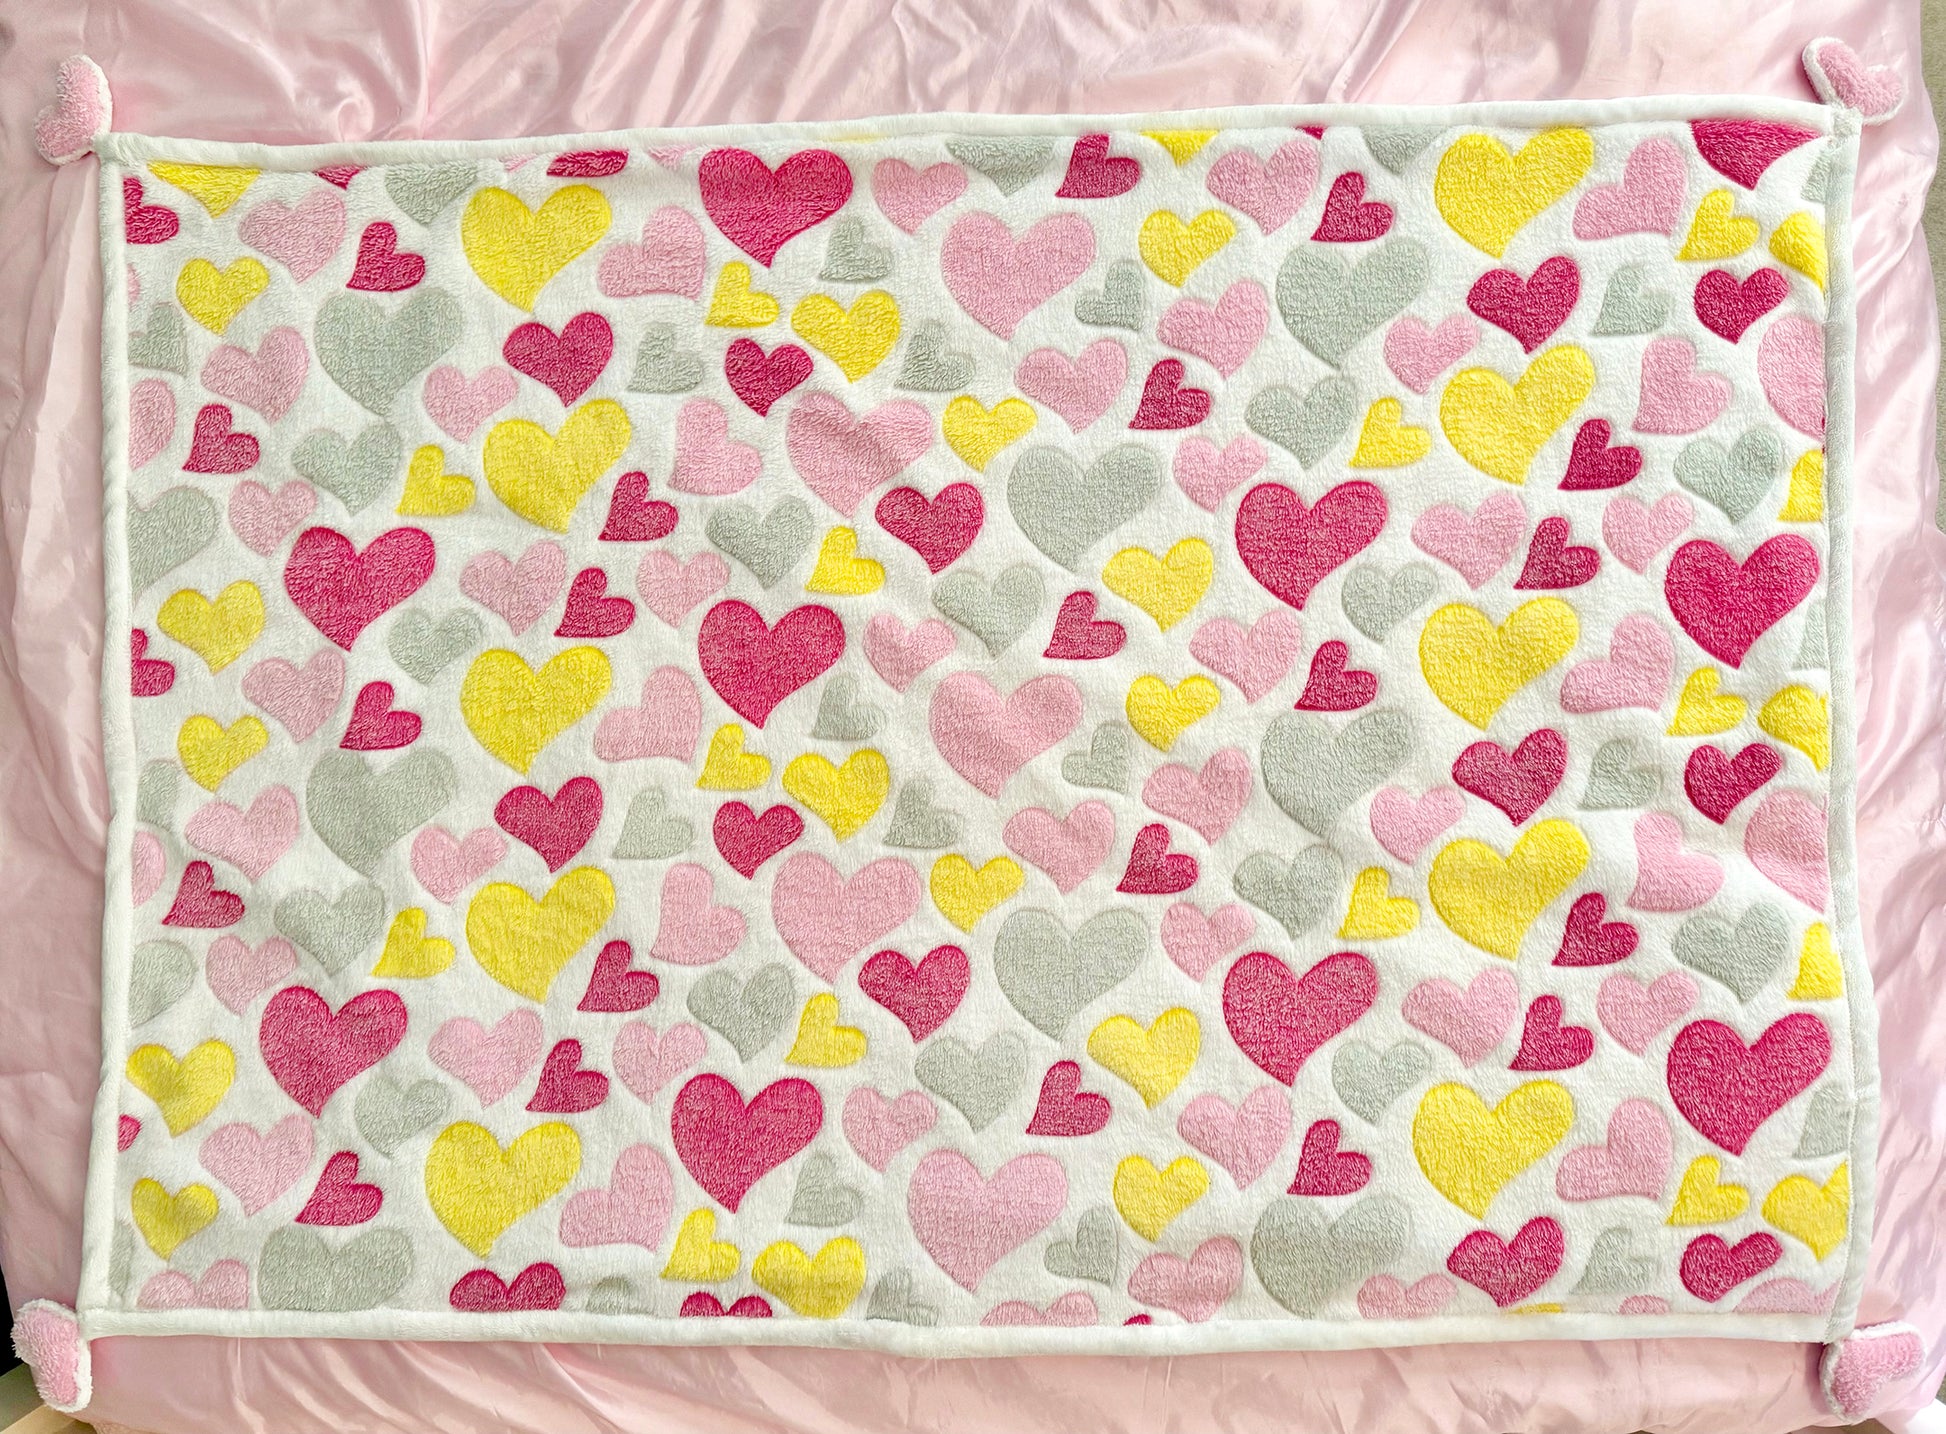 Cuddly soft, plush fabric blanket with multi-colored hearts in light & dark pink, yellow and light gray, in different sizes on one side, and solid white on the reverse side. Special detailing with puffy hearts on each corner of the blanket. Dimensions: 48" long x 36" wide Delicate wash cold, dry low heat Made in the USA